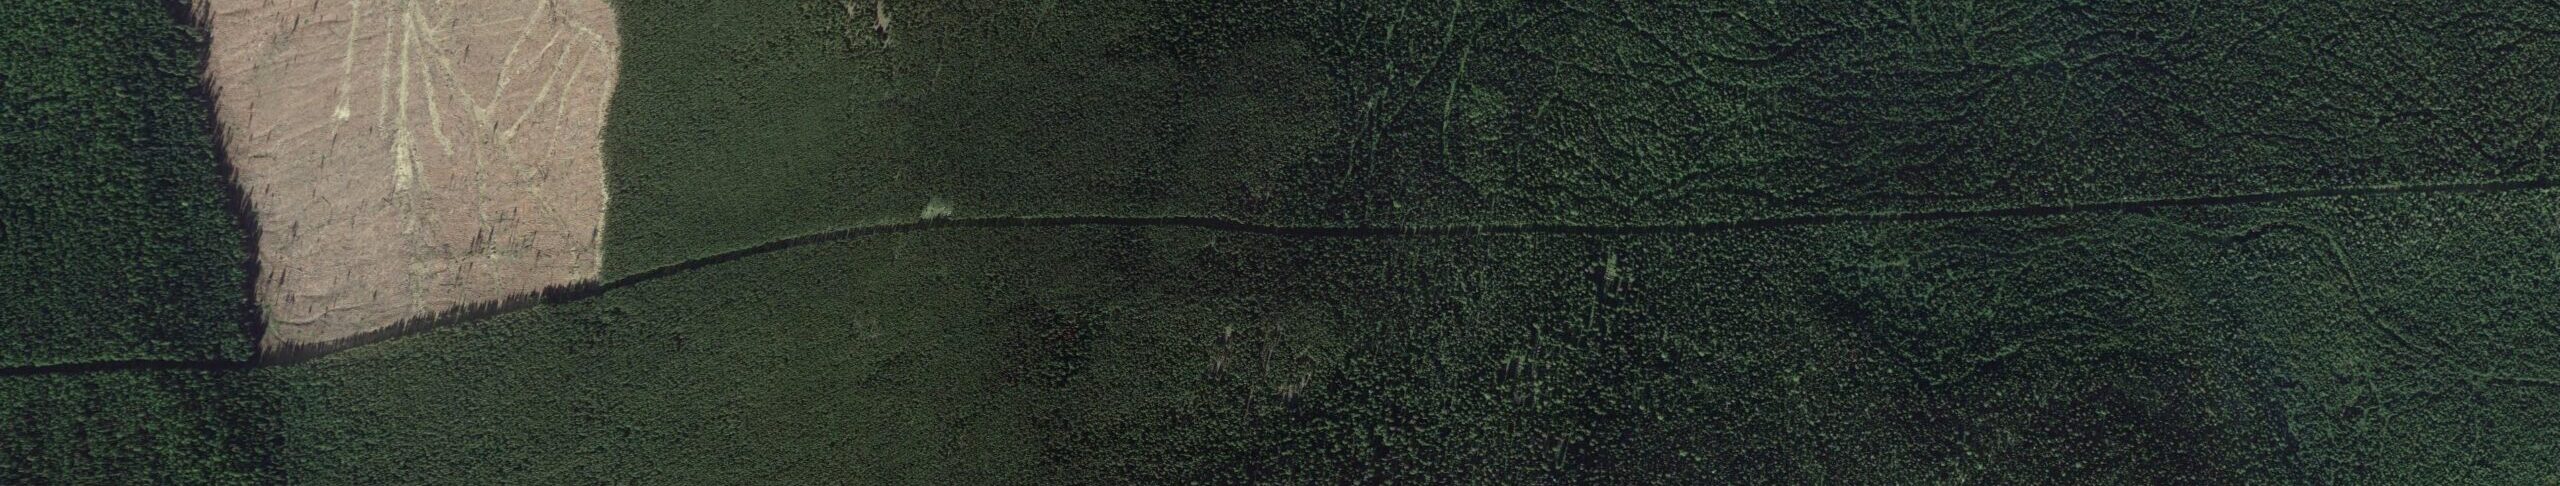 Frontière Canada-USA (Google Earth)